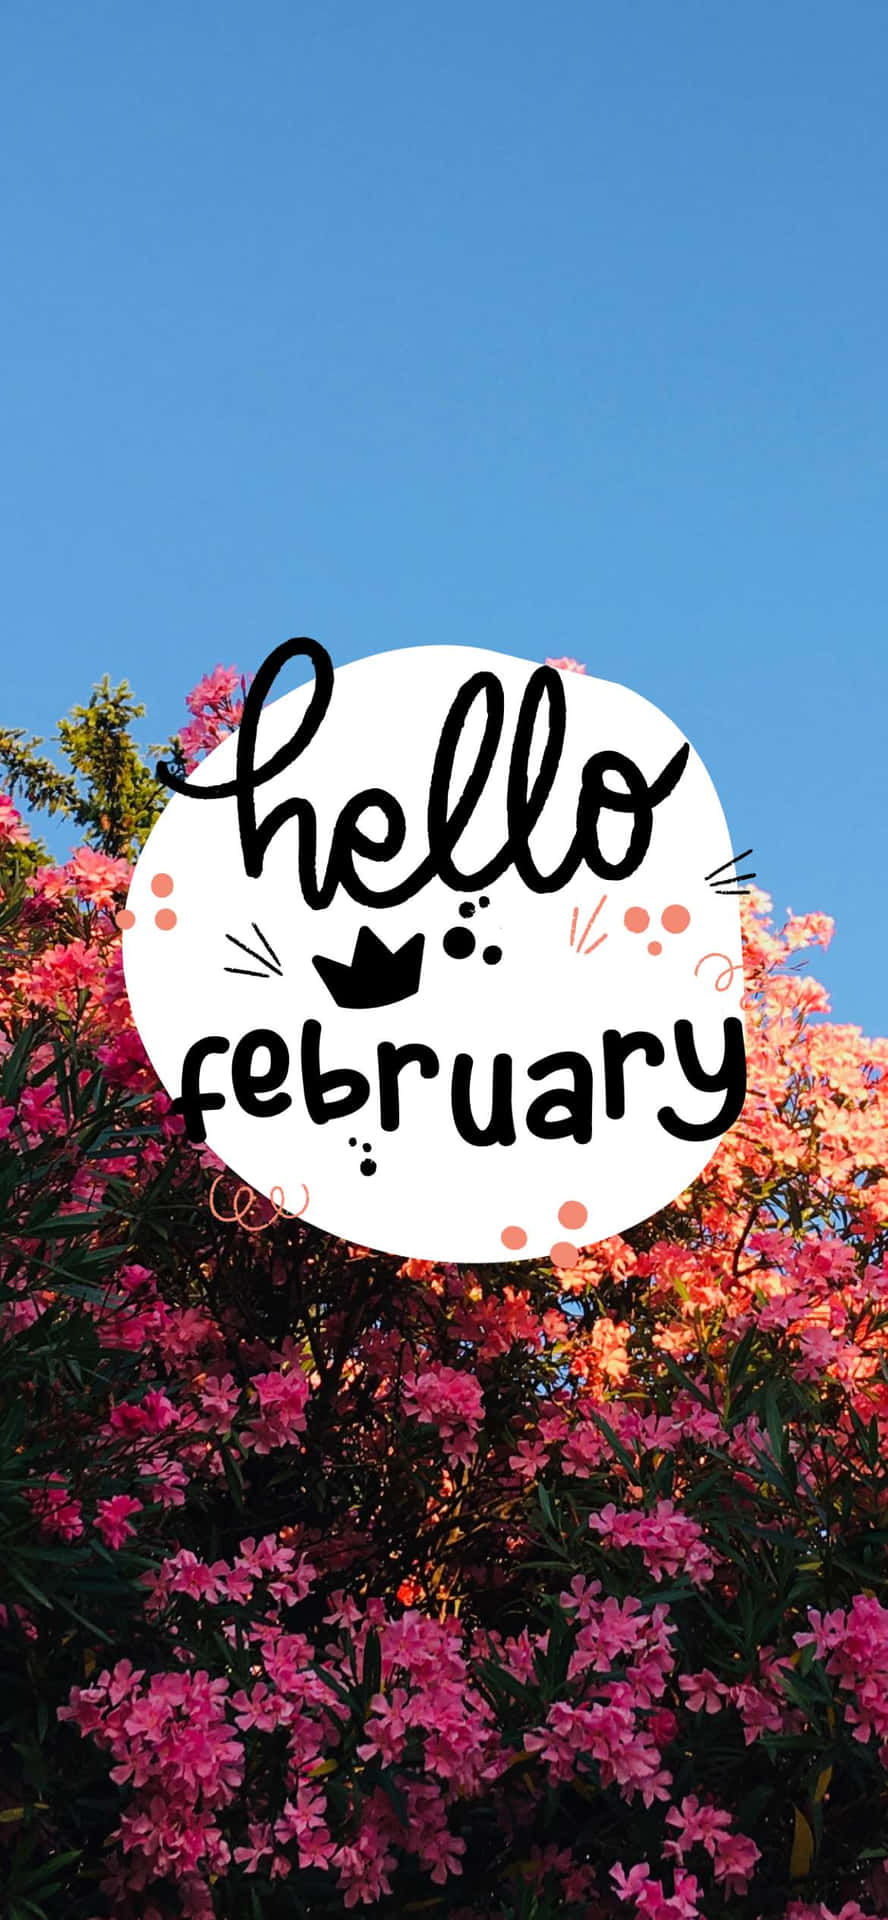 Hello February - A Flowering Tree With The Words Hello February Wallpaper